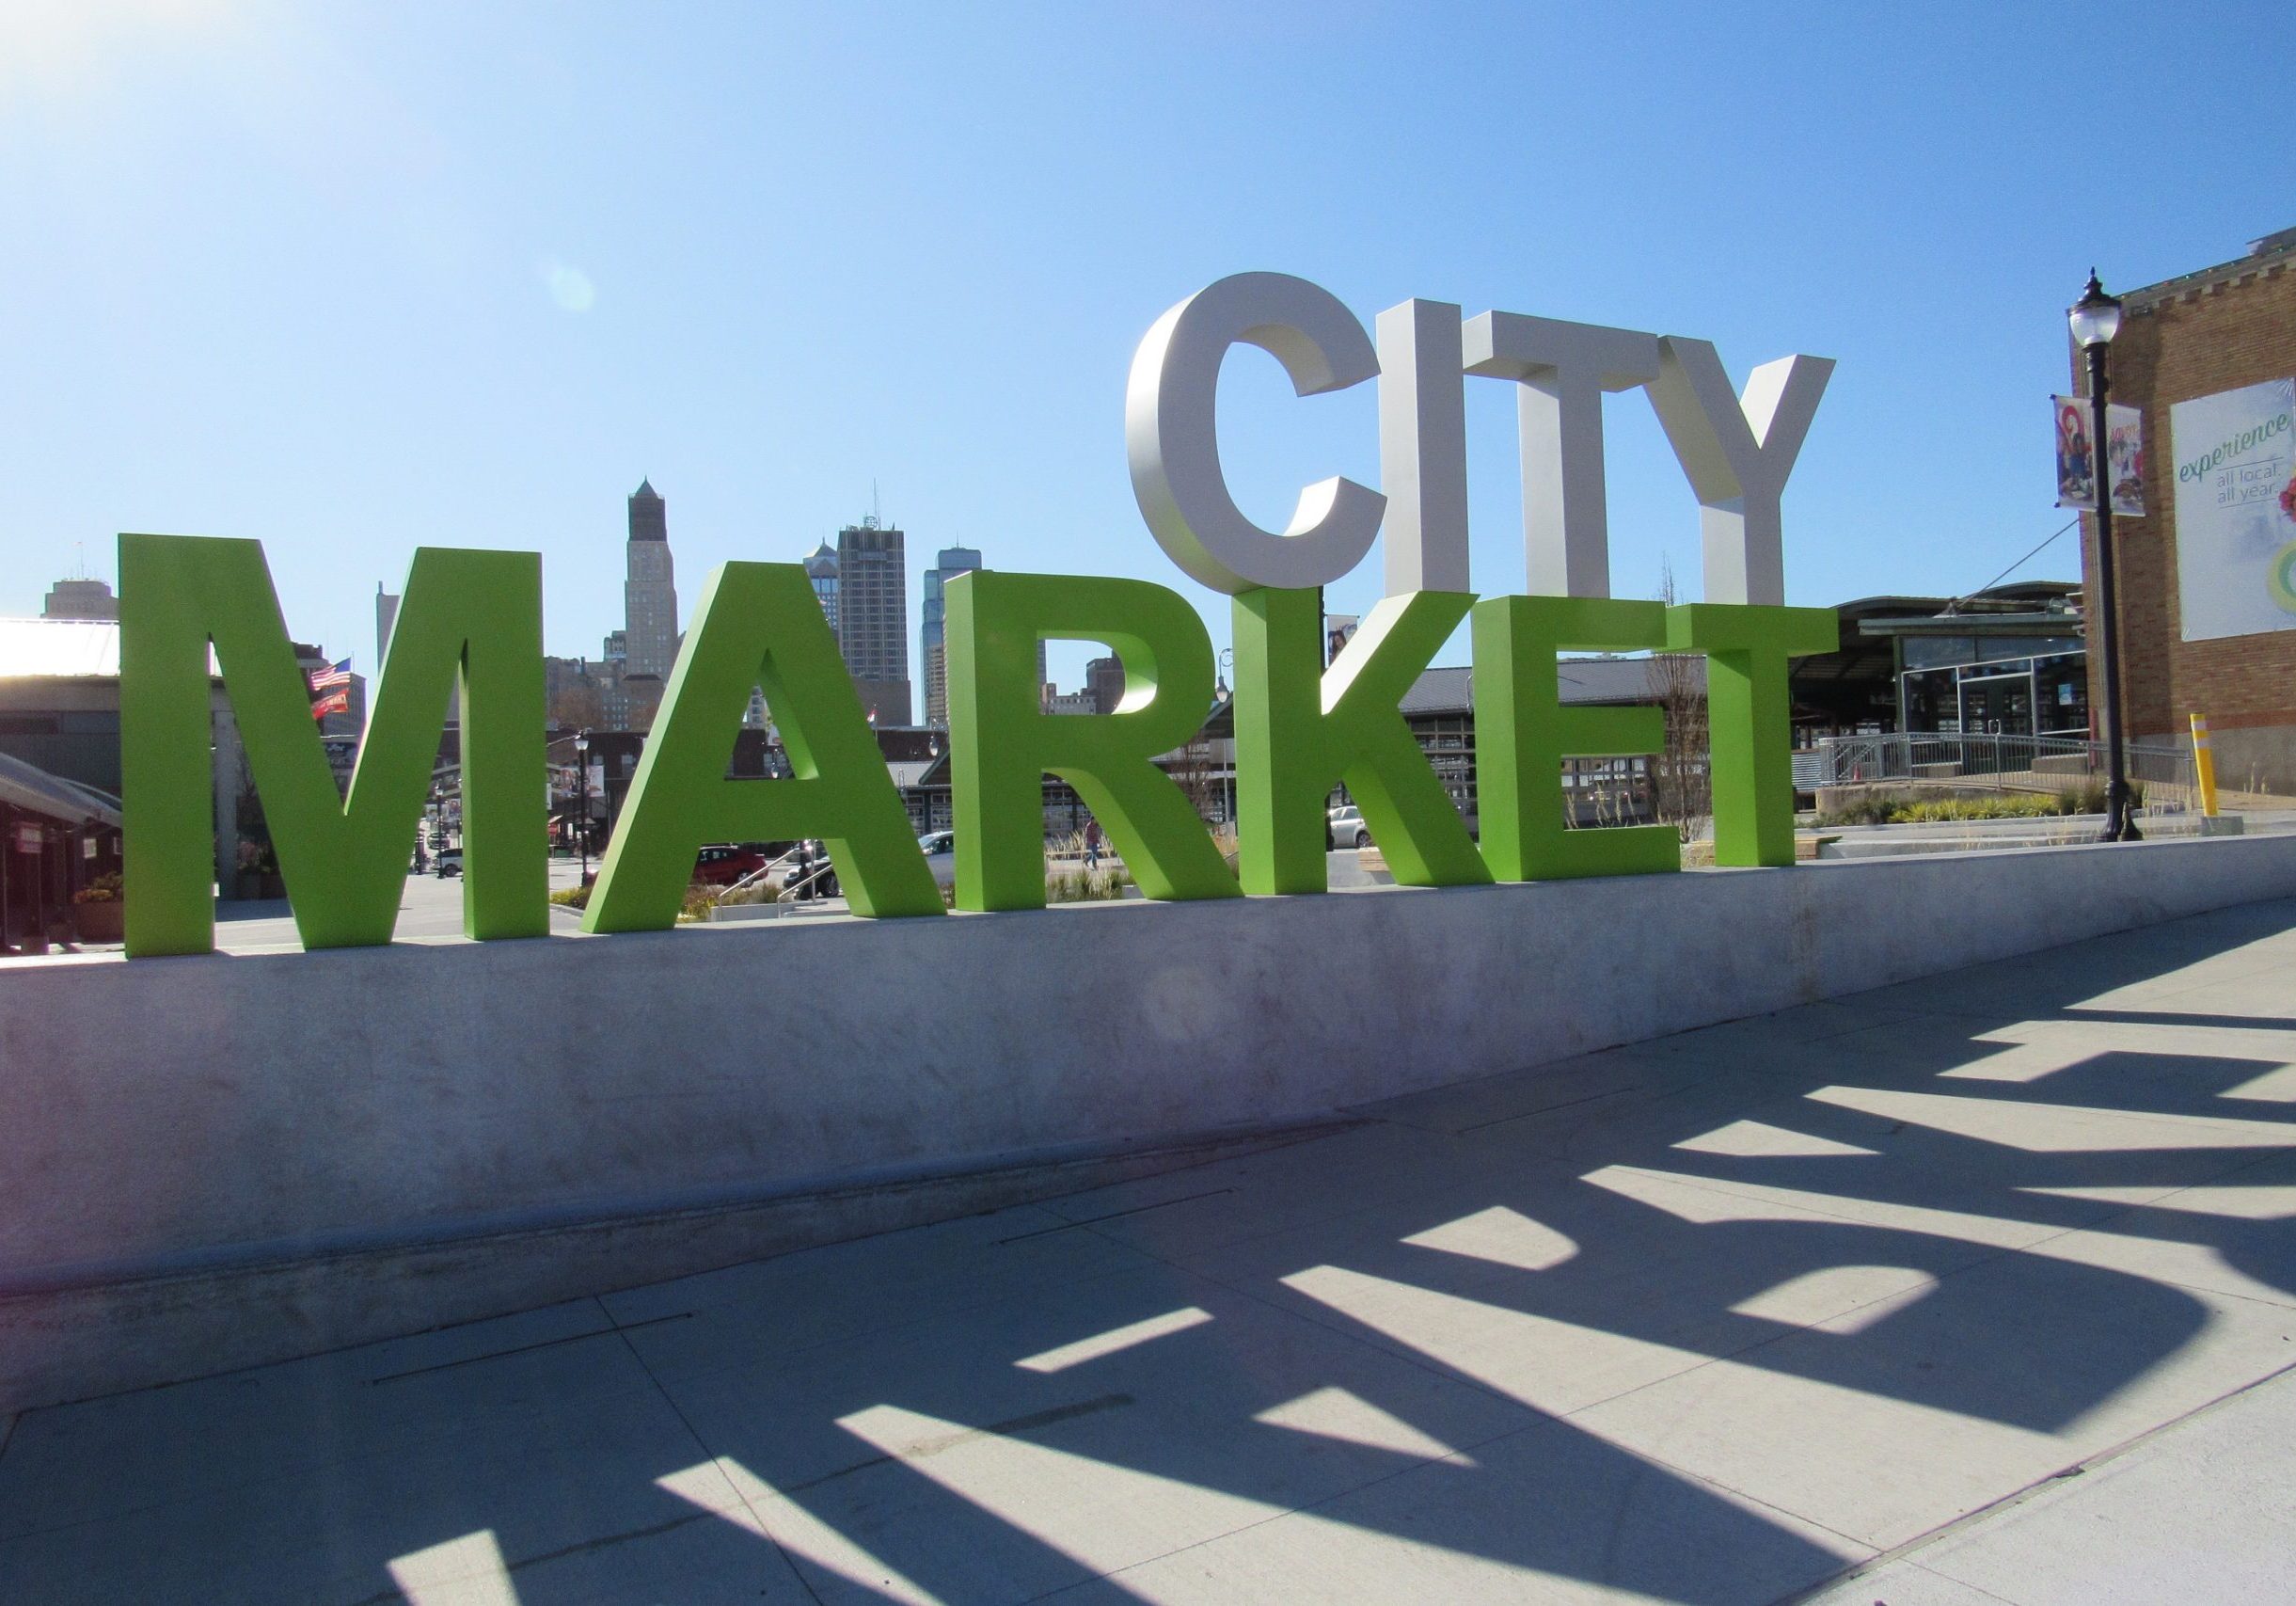 City market sign at the River Market in Kansas City with shadows